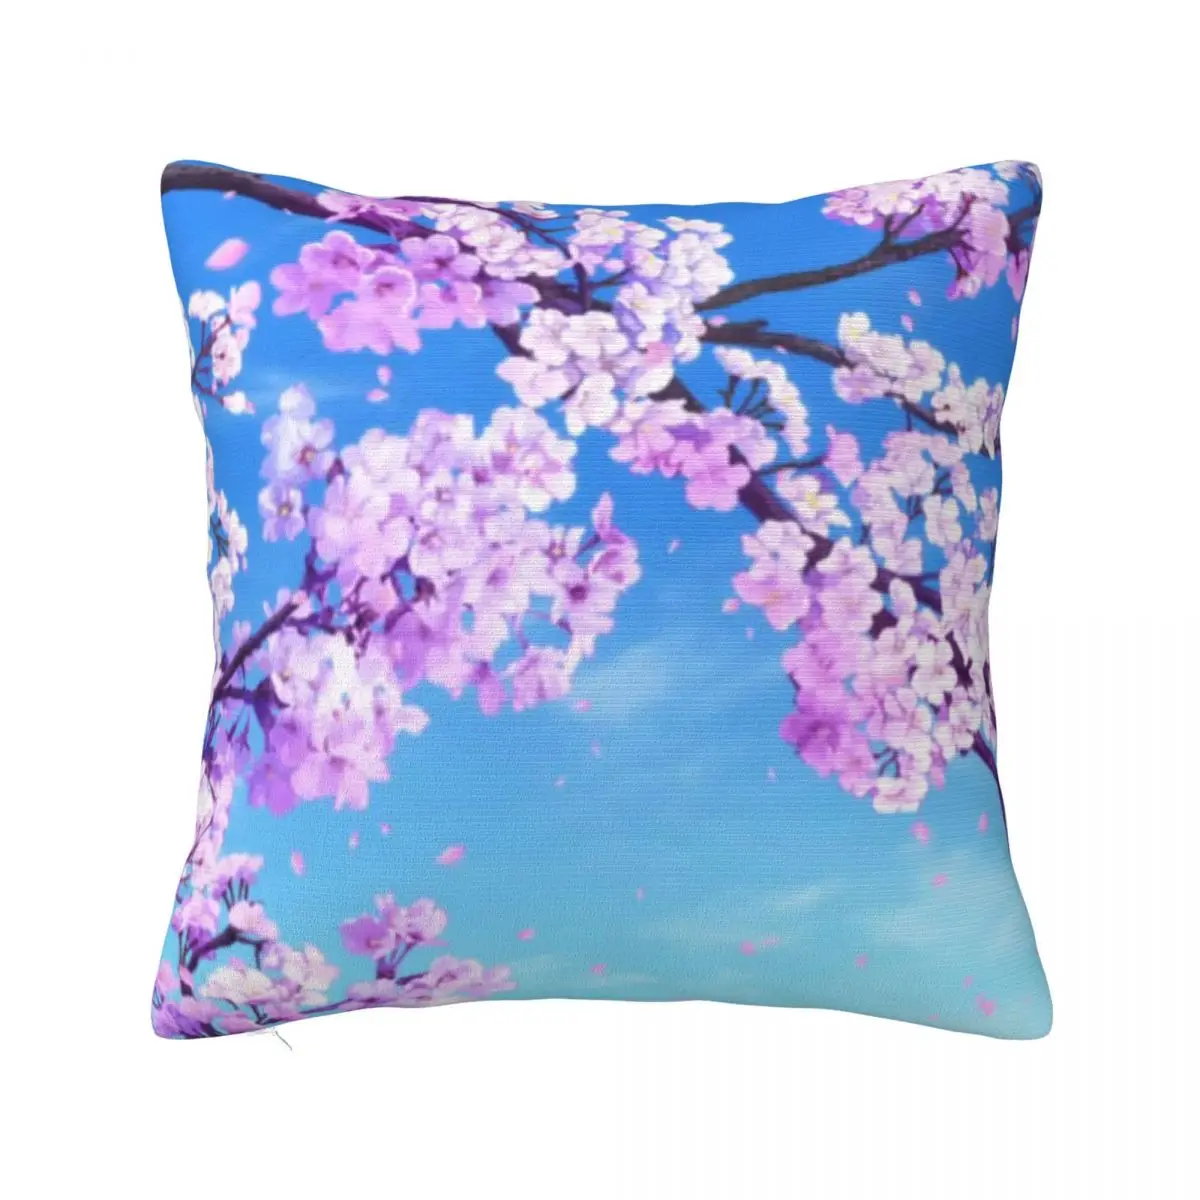 

Sakura Blooming Pillowcase Printed Polyester Cushion Cover Decorations Cherry Japanese Flower Throw Pillow Case Cover Home 45cm